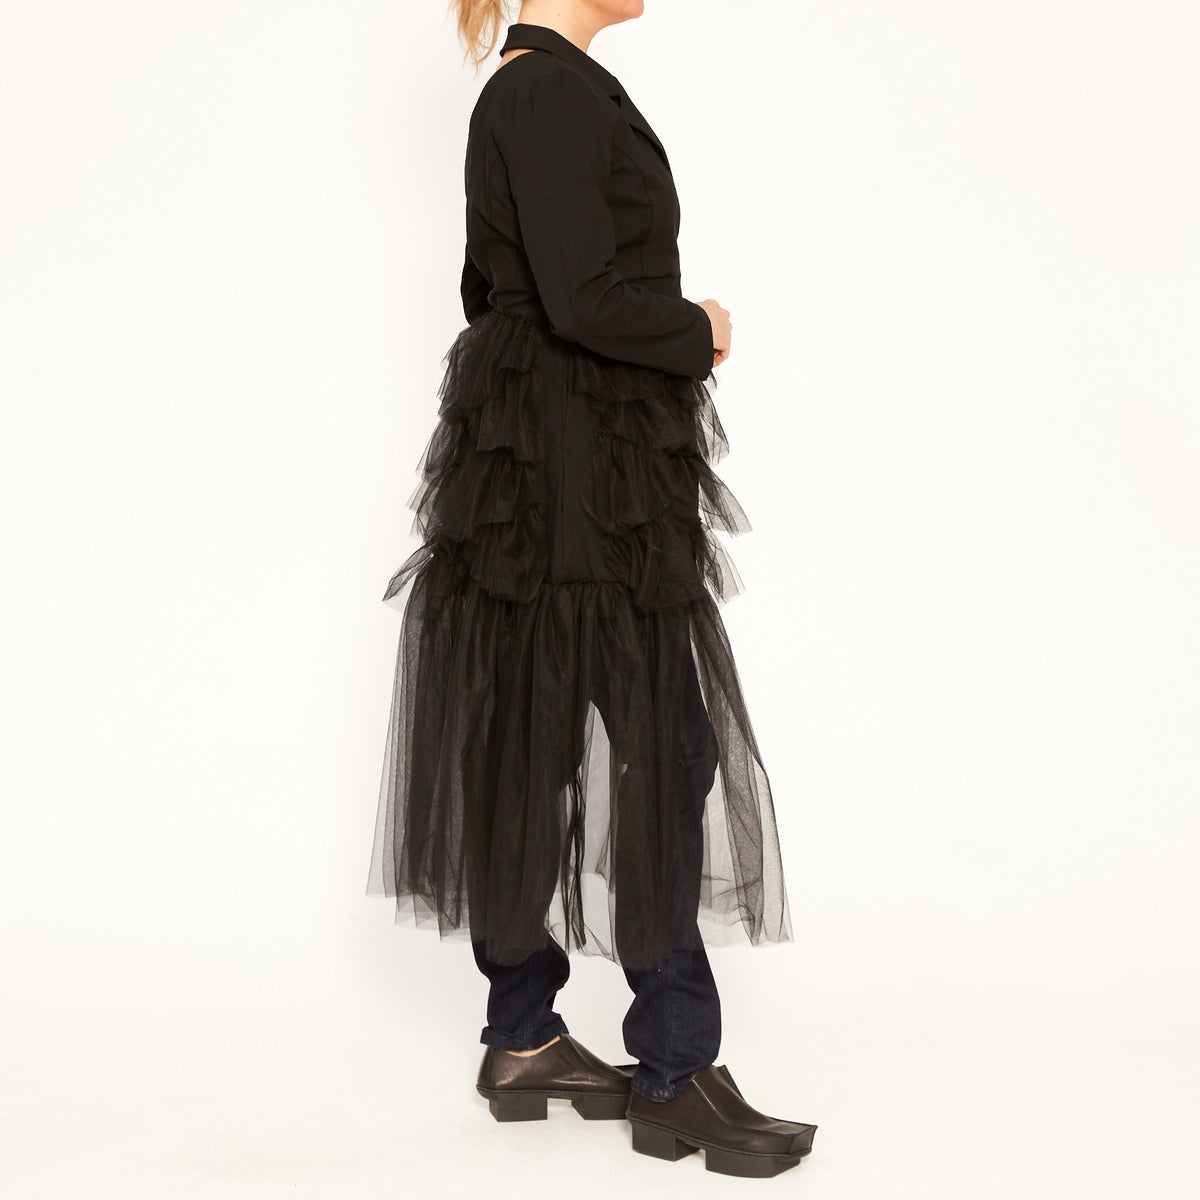 The Tulle Jacket